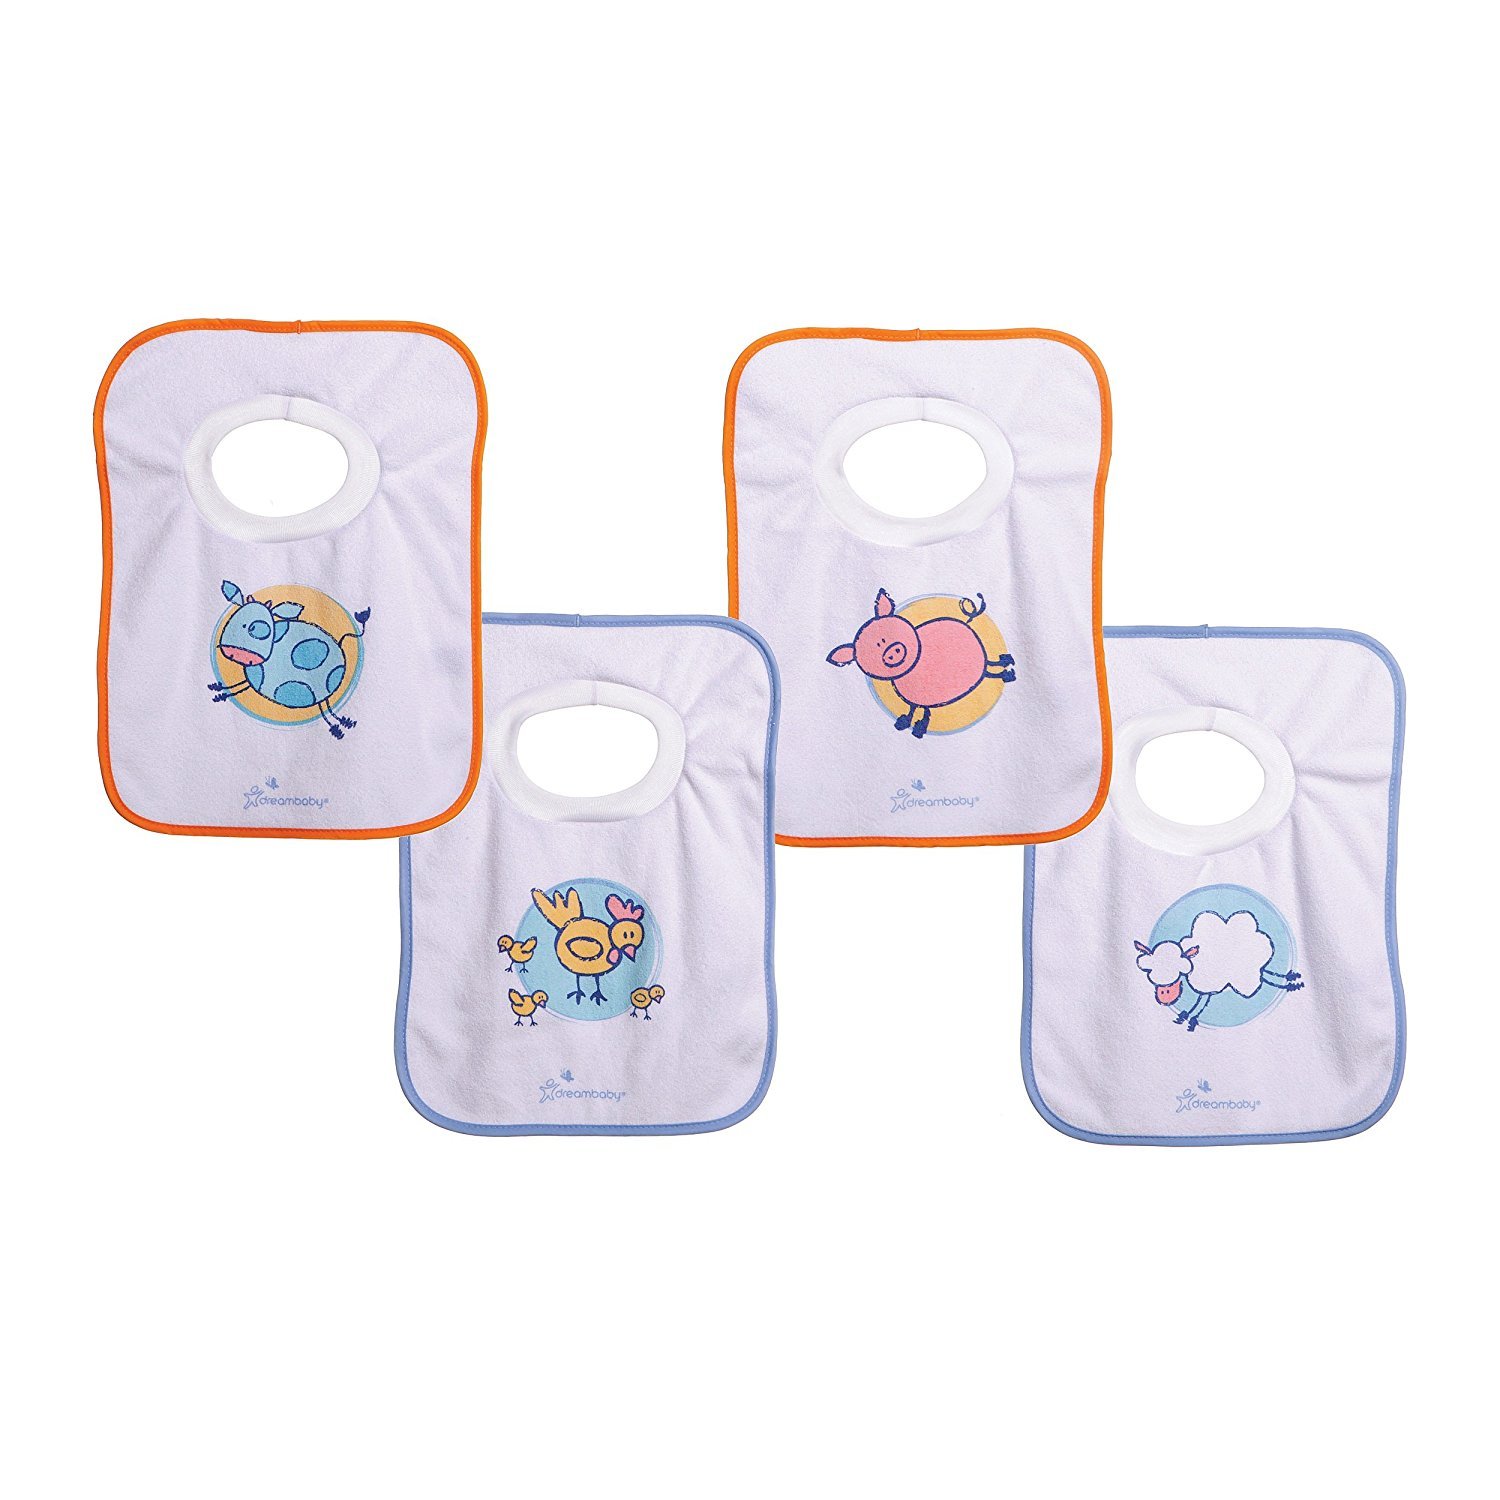 Dreambaby Terry Cloth Pullover Baby Bibs - Super Absorbent for Feeding and Drooling Toddlers - Farm Animals , 4 Count